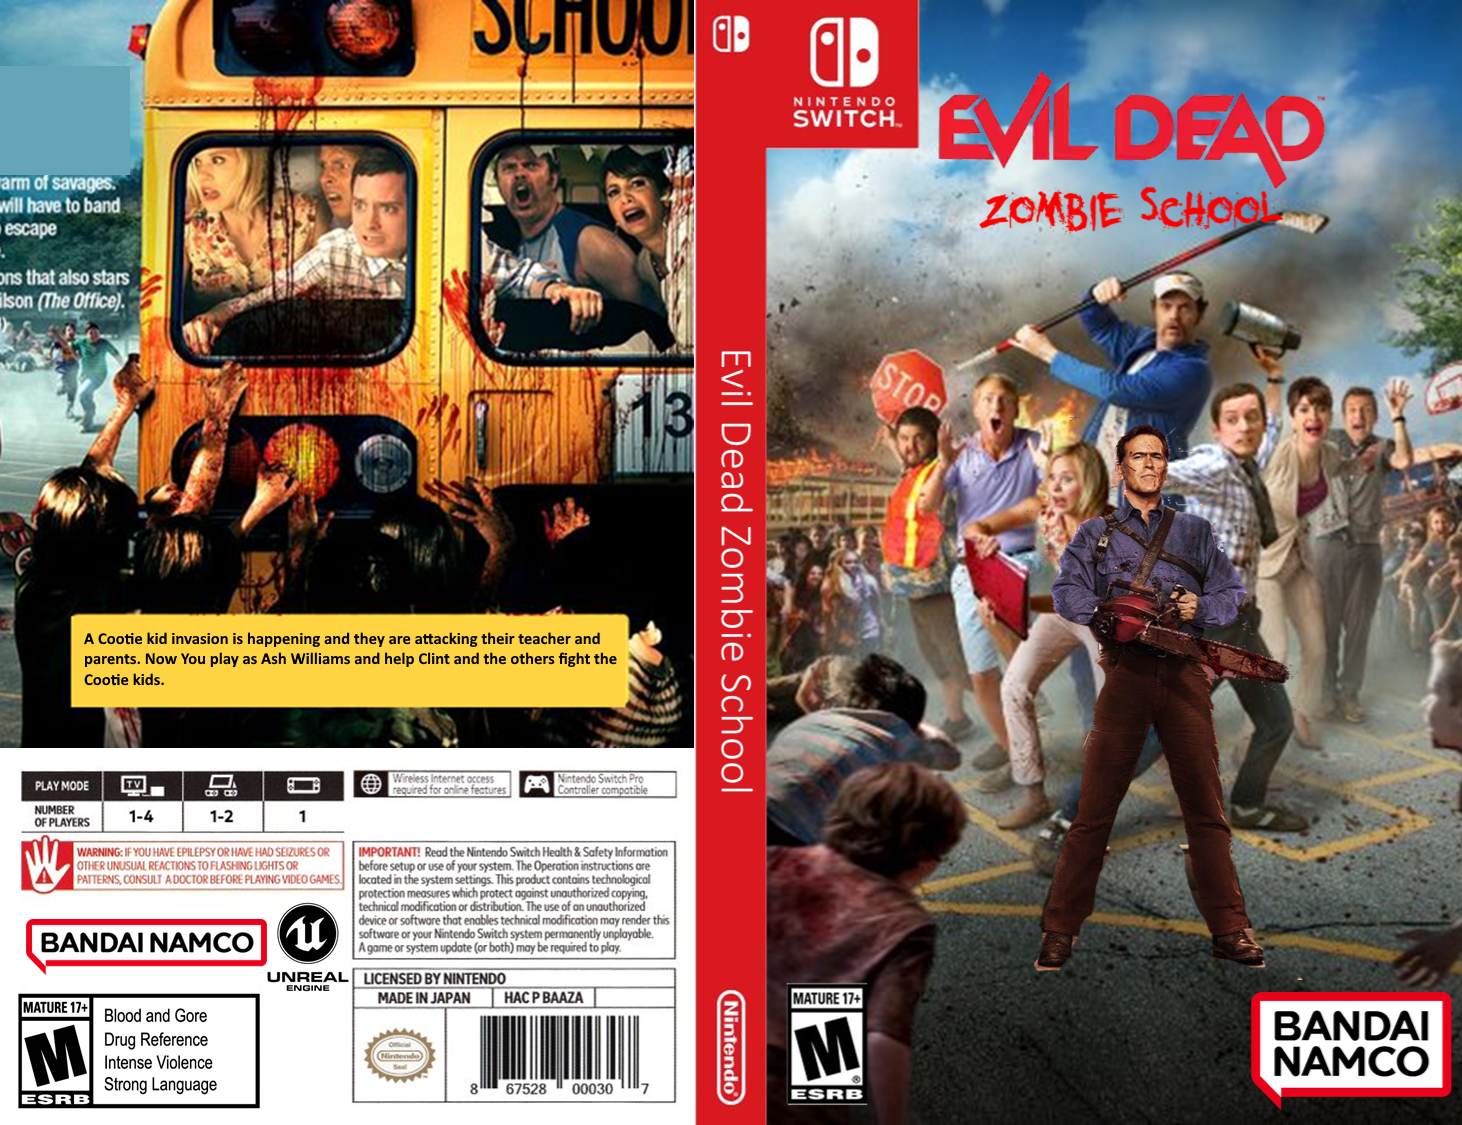 Category:The Evil Dead games, PlayStation Wiki